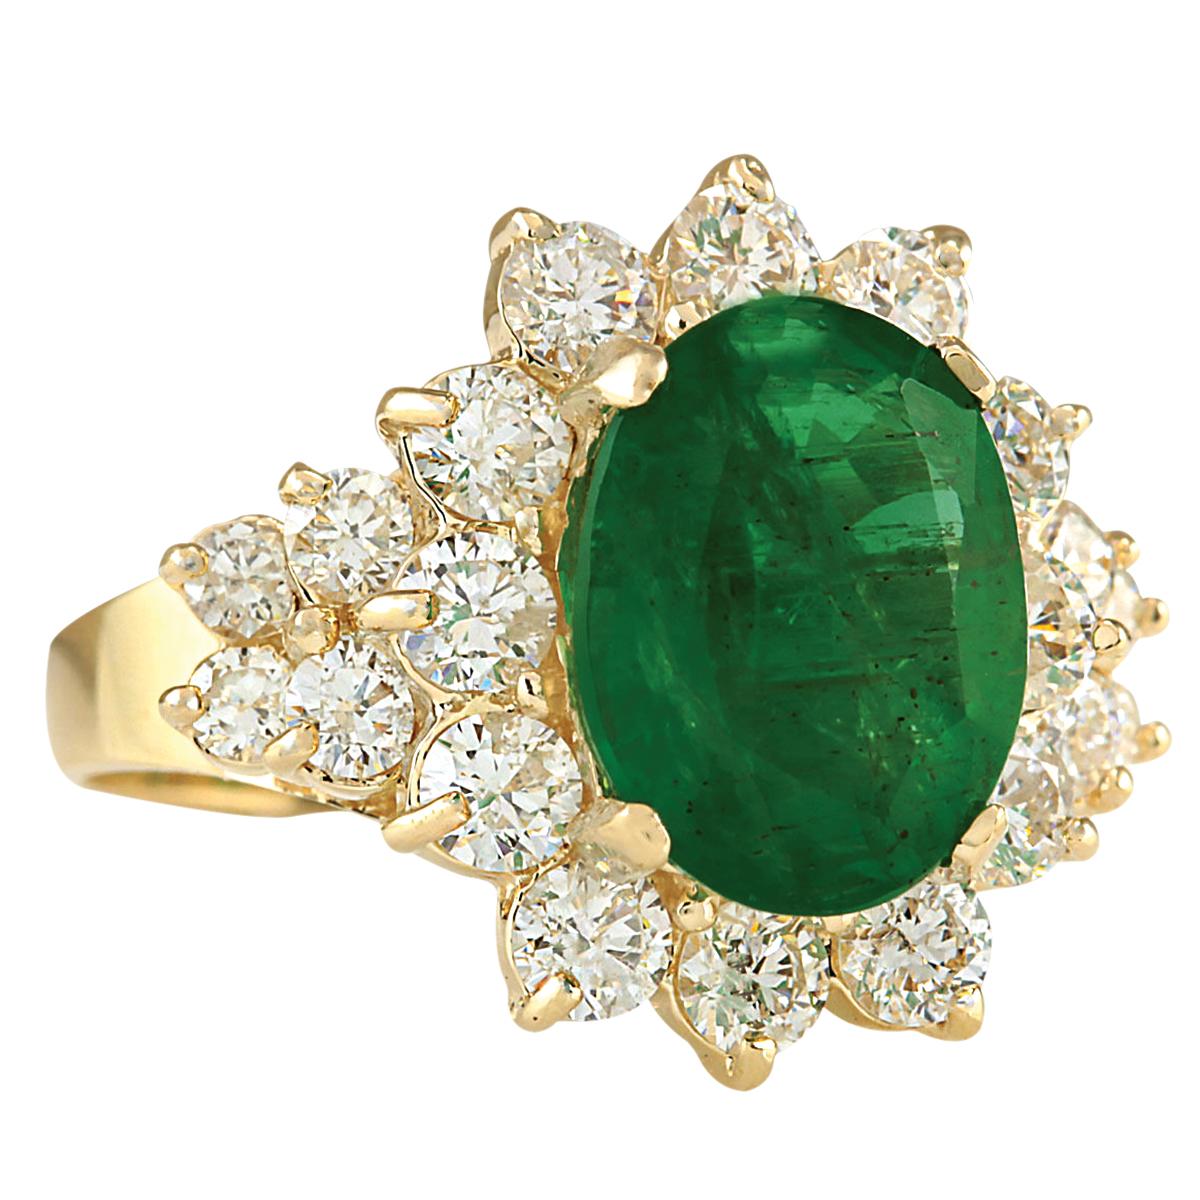 5.30 Carat Emerald 14 Karat Yellow Gold Diamond Ring
Stamped: 14K Yellow Gold
Total Ring Weight: 5.8 Grams
Total  Emerald Weight is 3.65 Carat (Measures: 11.00x9.00 mm)
Color: Green
Total  Diamond Weight is 1.65 Carat
Color: F-G, Clarity: